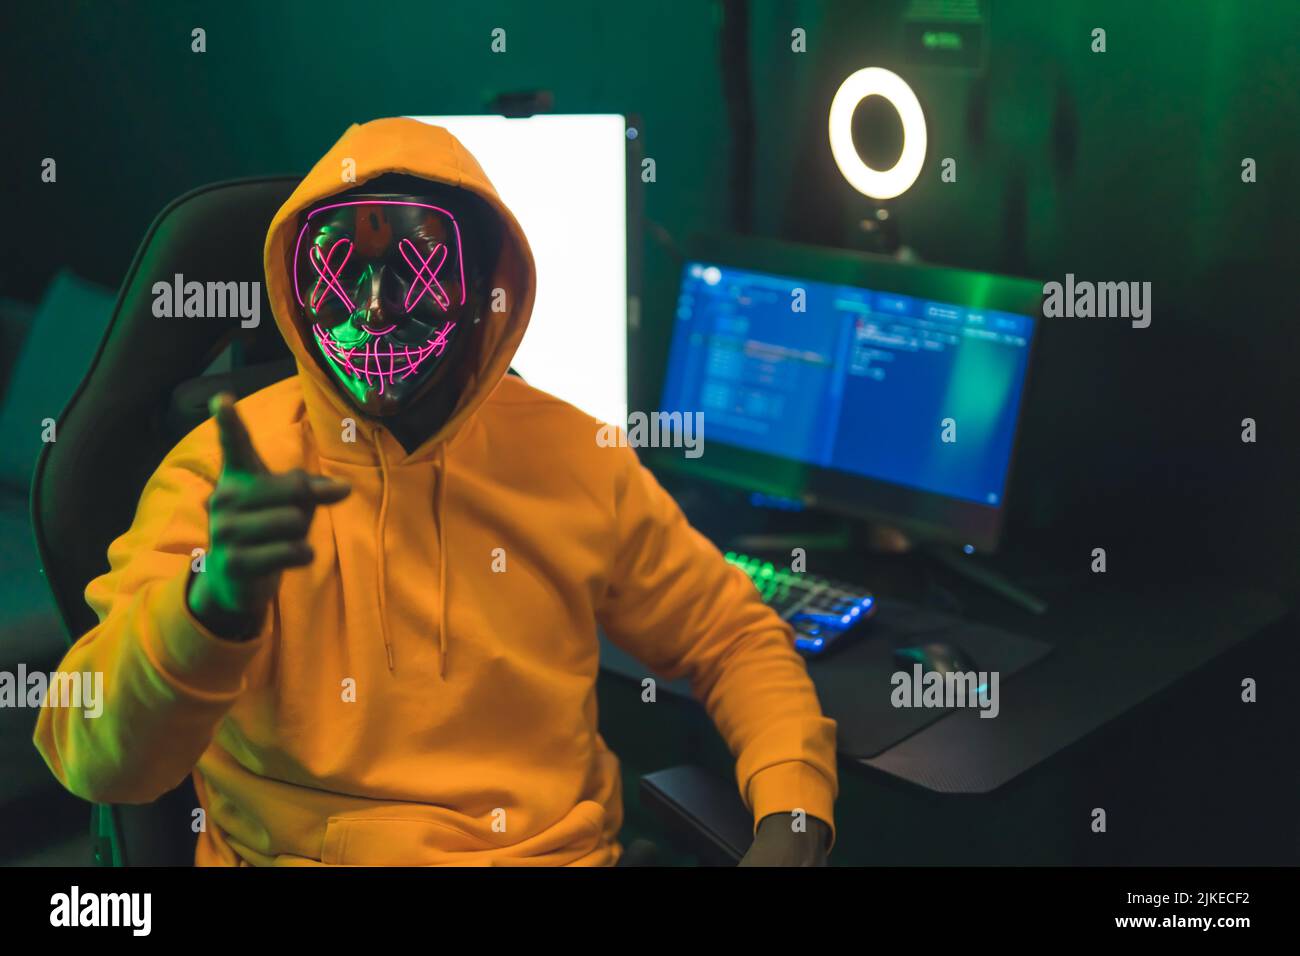 Young black man in orange hoodie and strange mask pointing at camera sitting by desk with gaming setup and ring light. Dark green lighting. High quality photo Stock Photo